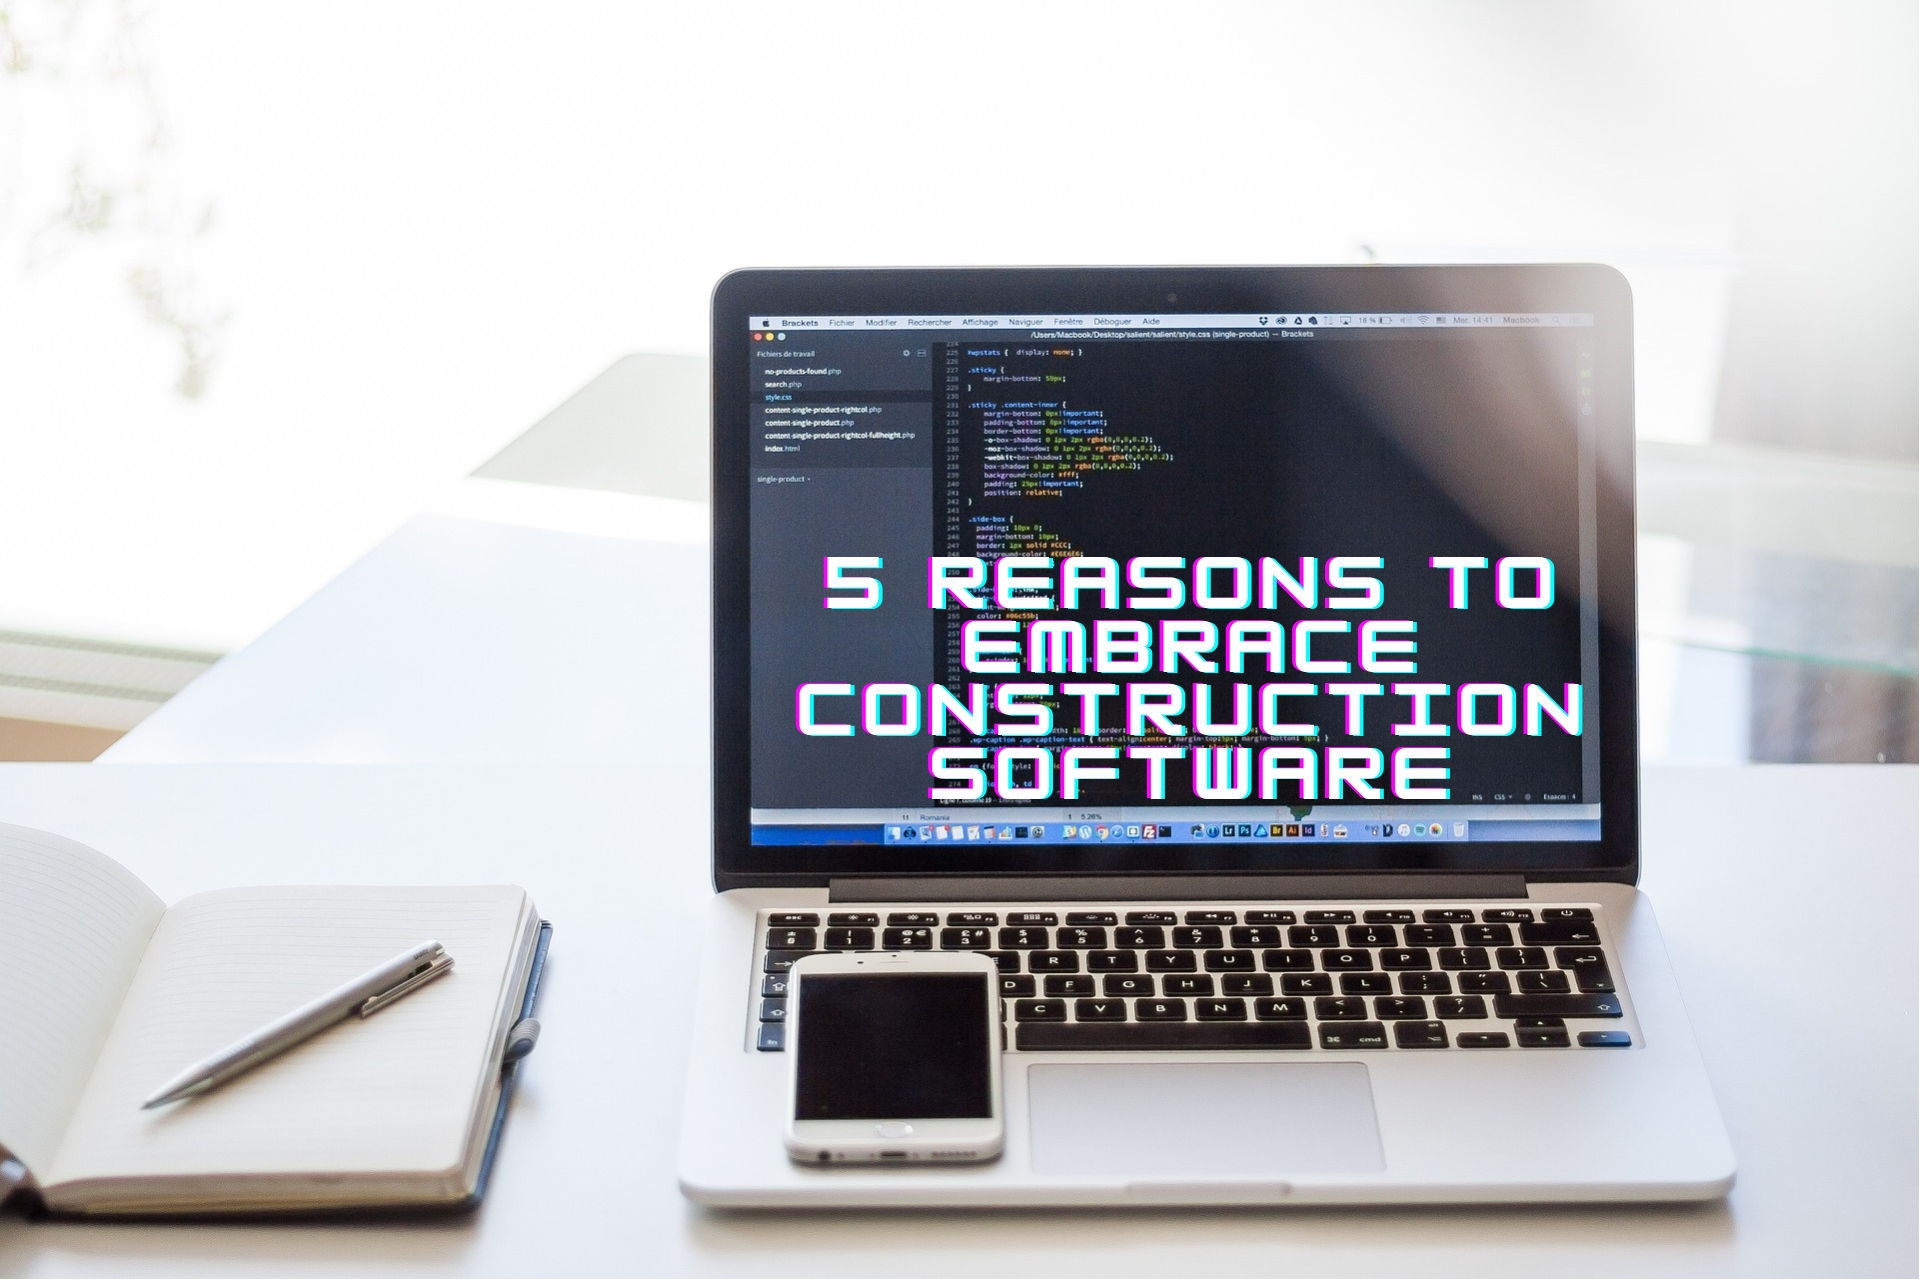 5 Reasons to Embrace Construction Software